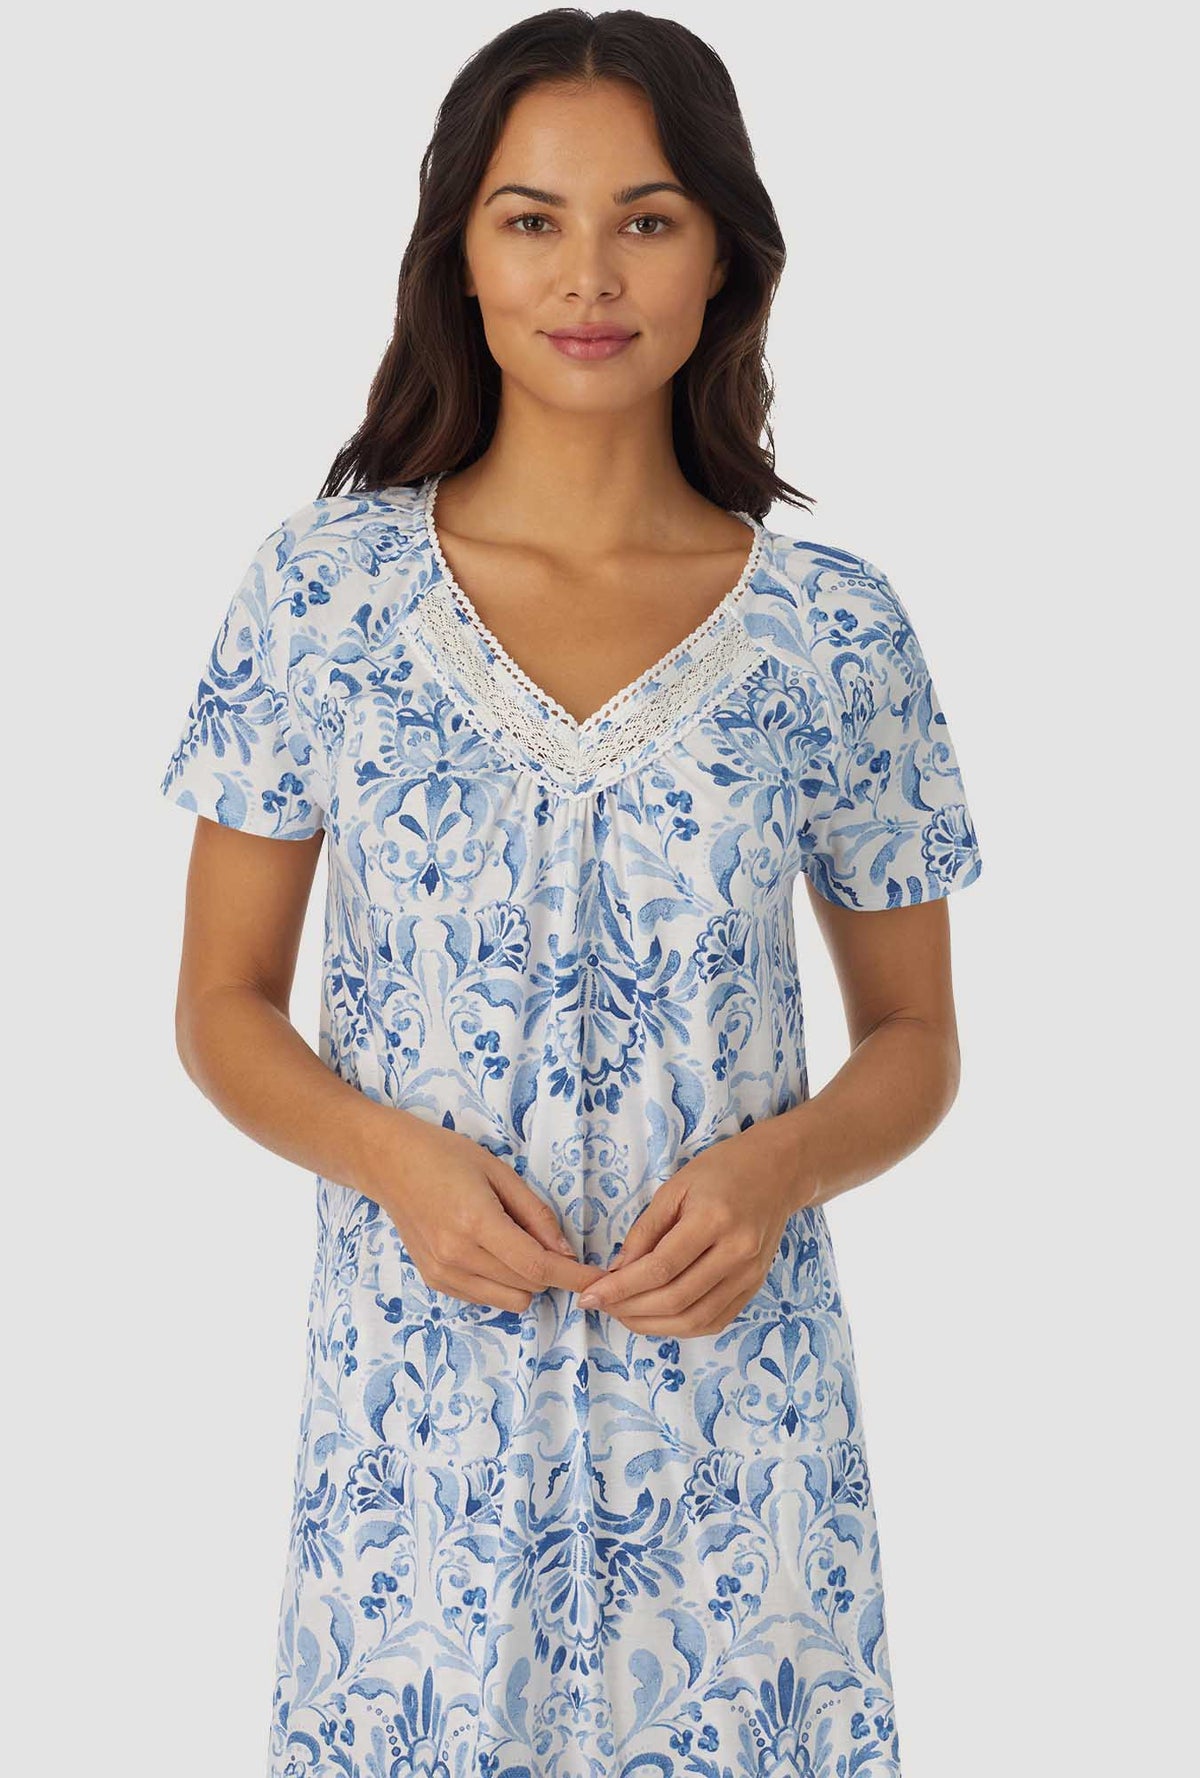 Blue Damask Cap Sleeve Nightgown